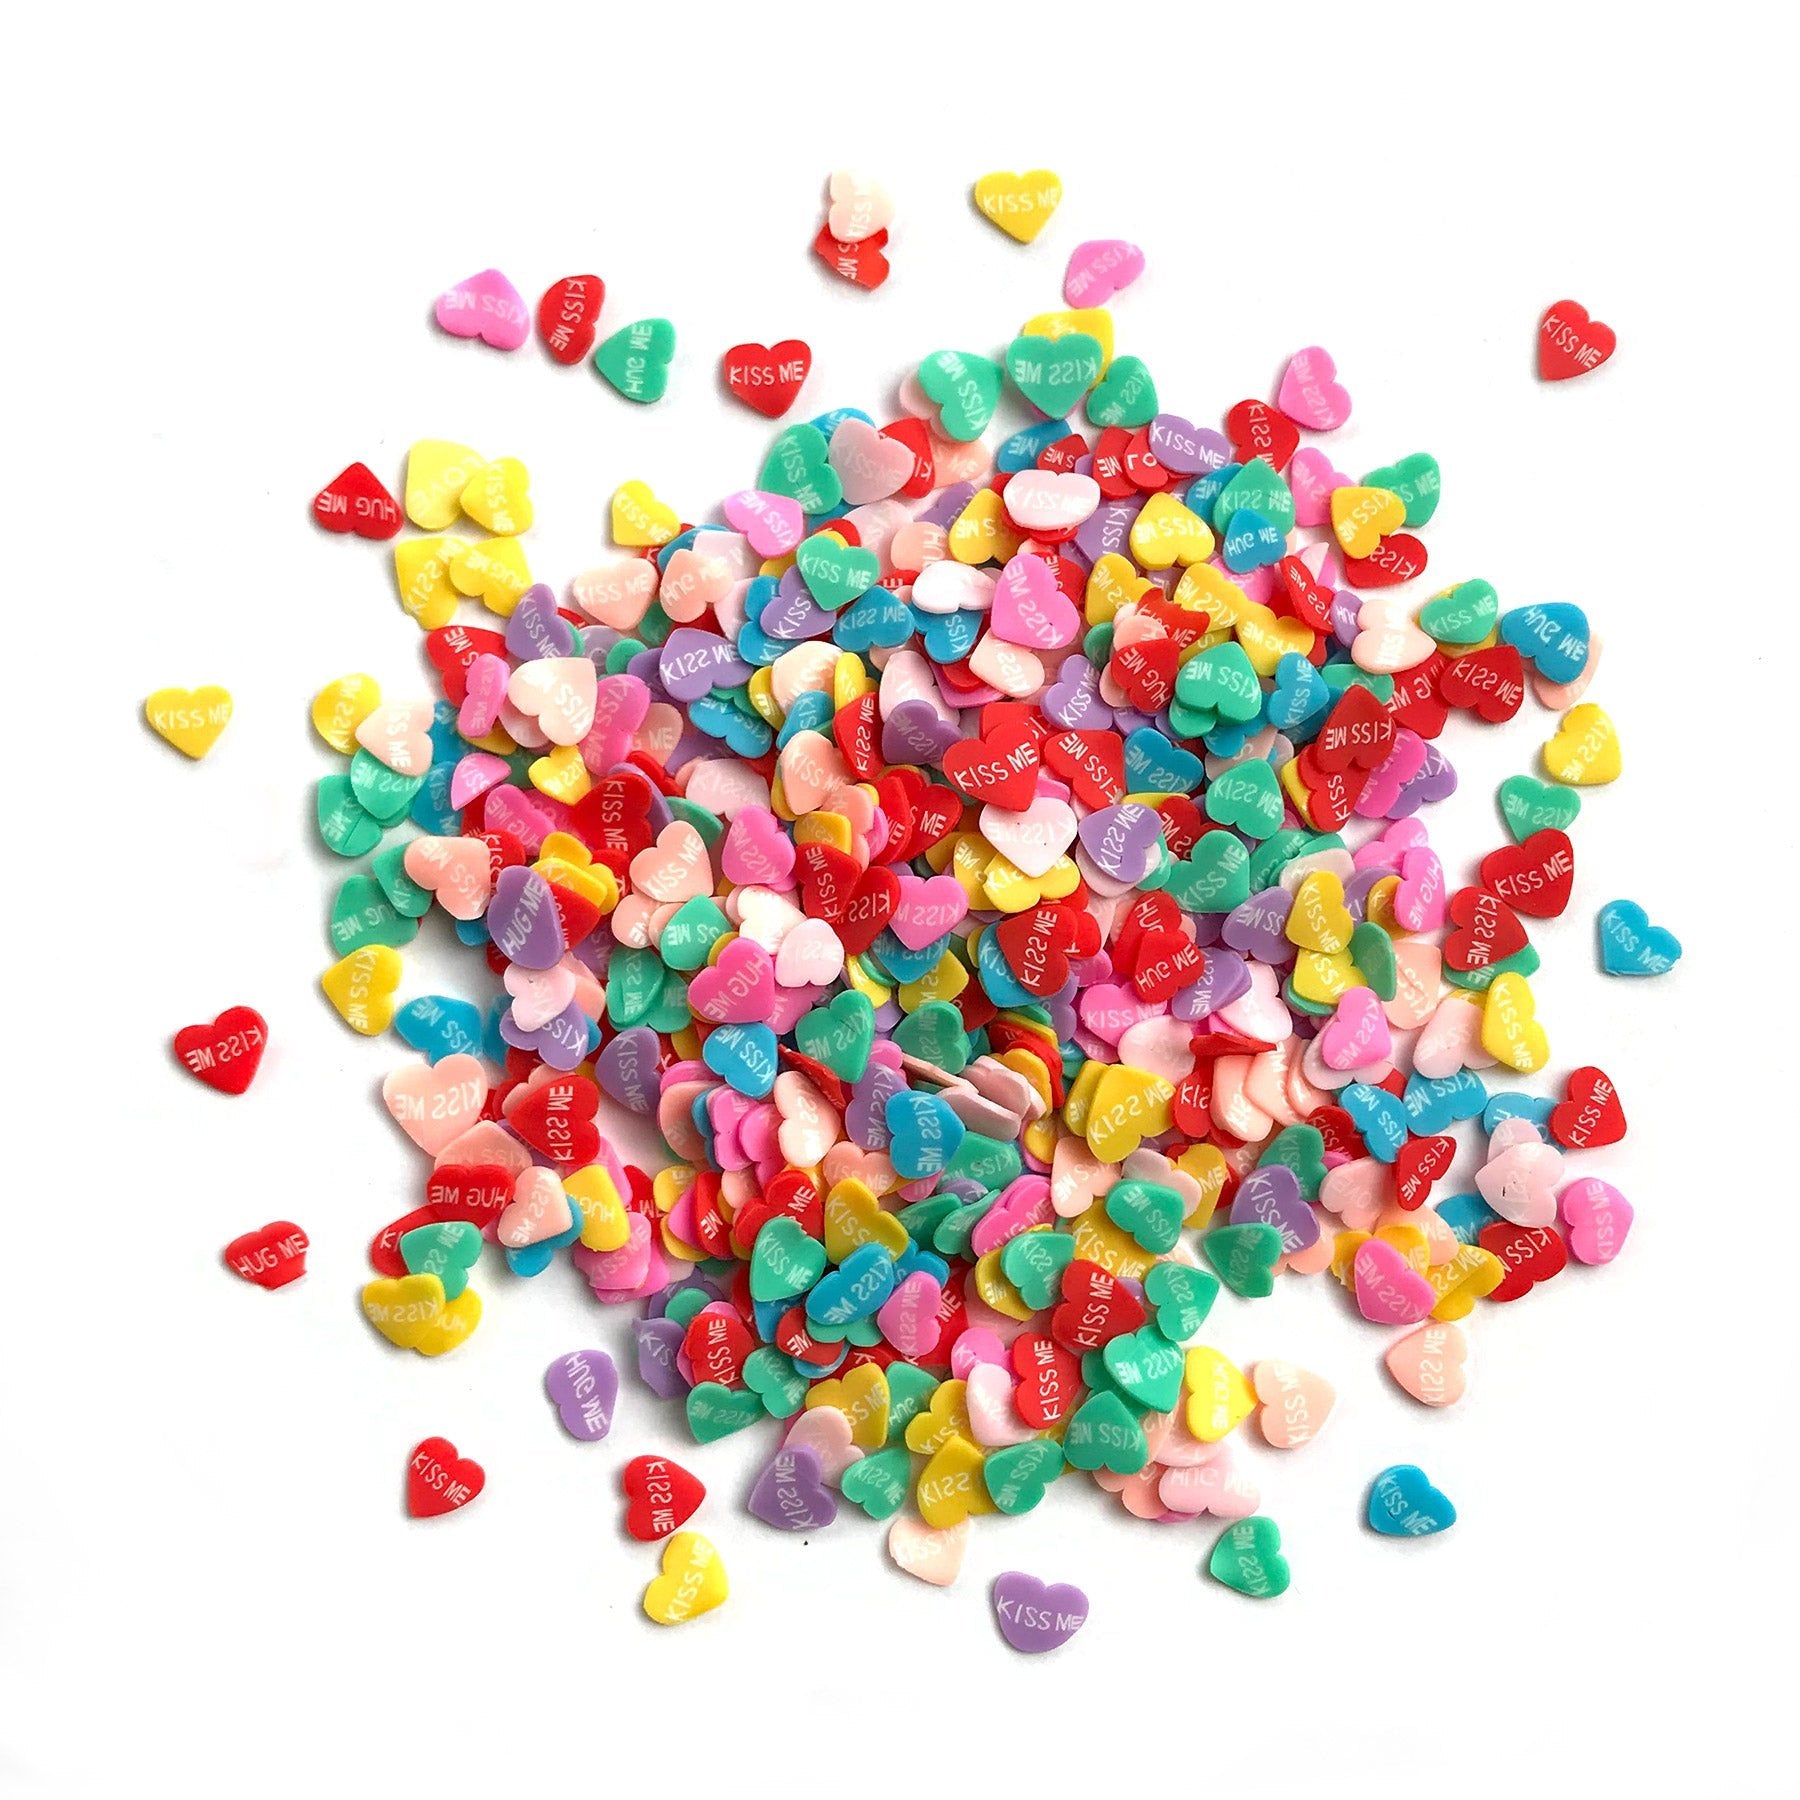 Sprinkleltz Love Bundle - Buttons Galore and More